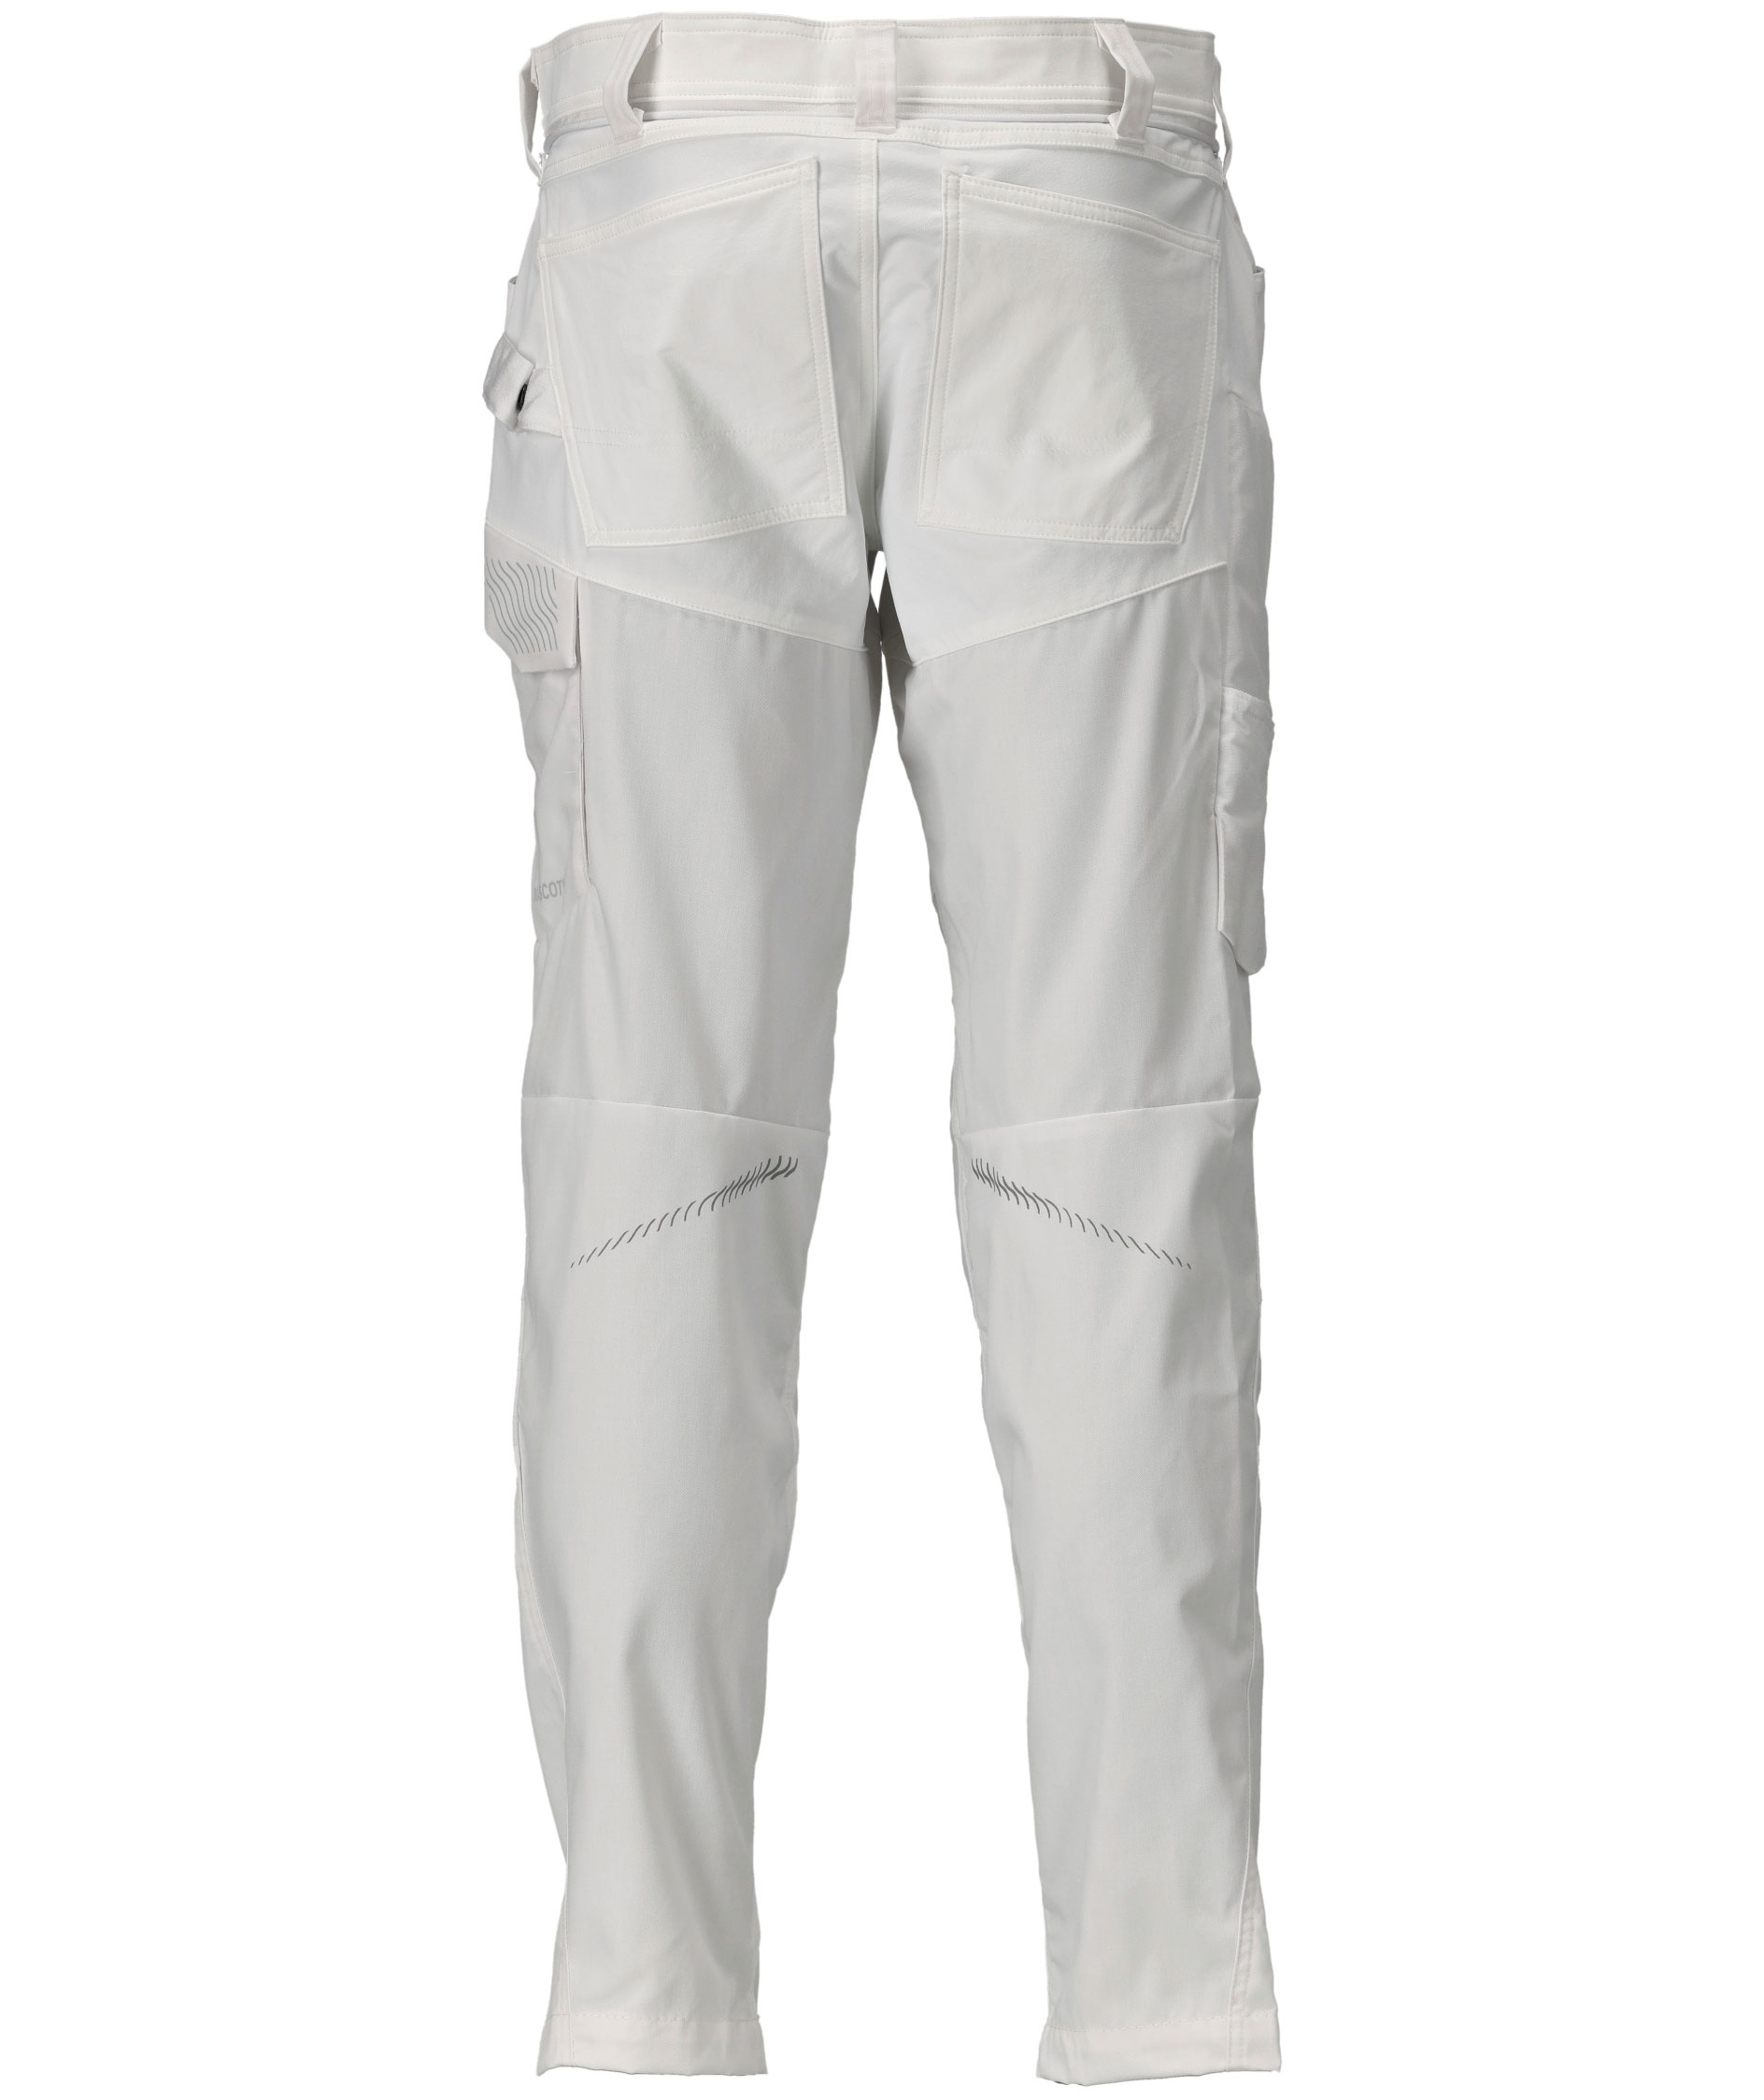 17049-311 ¾ Length Trousers with holster pockets - MASCOT® ADVANCED